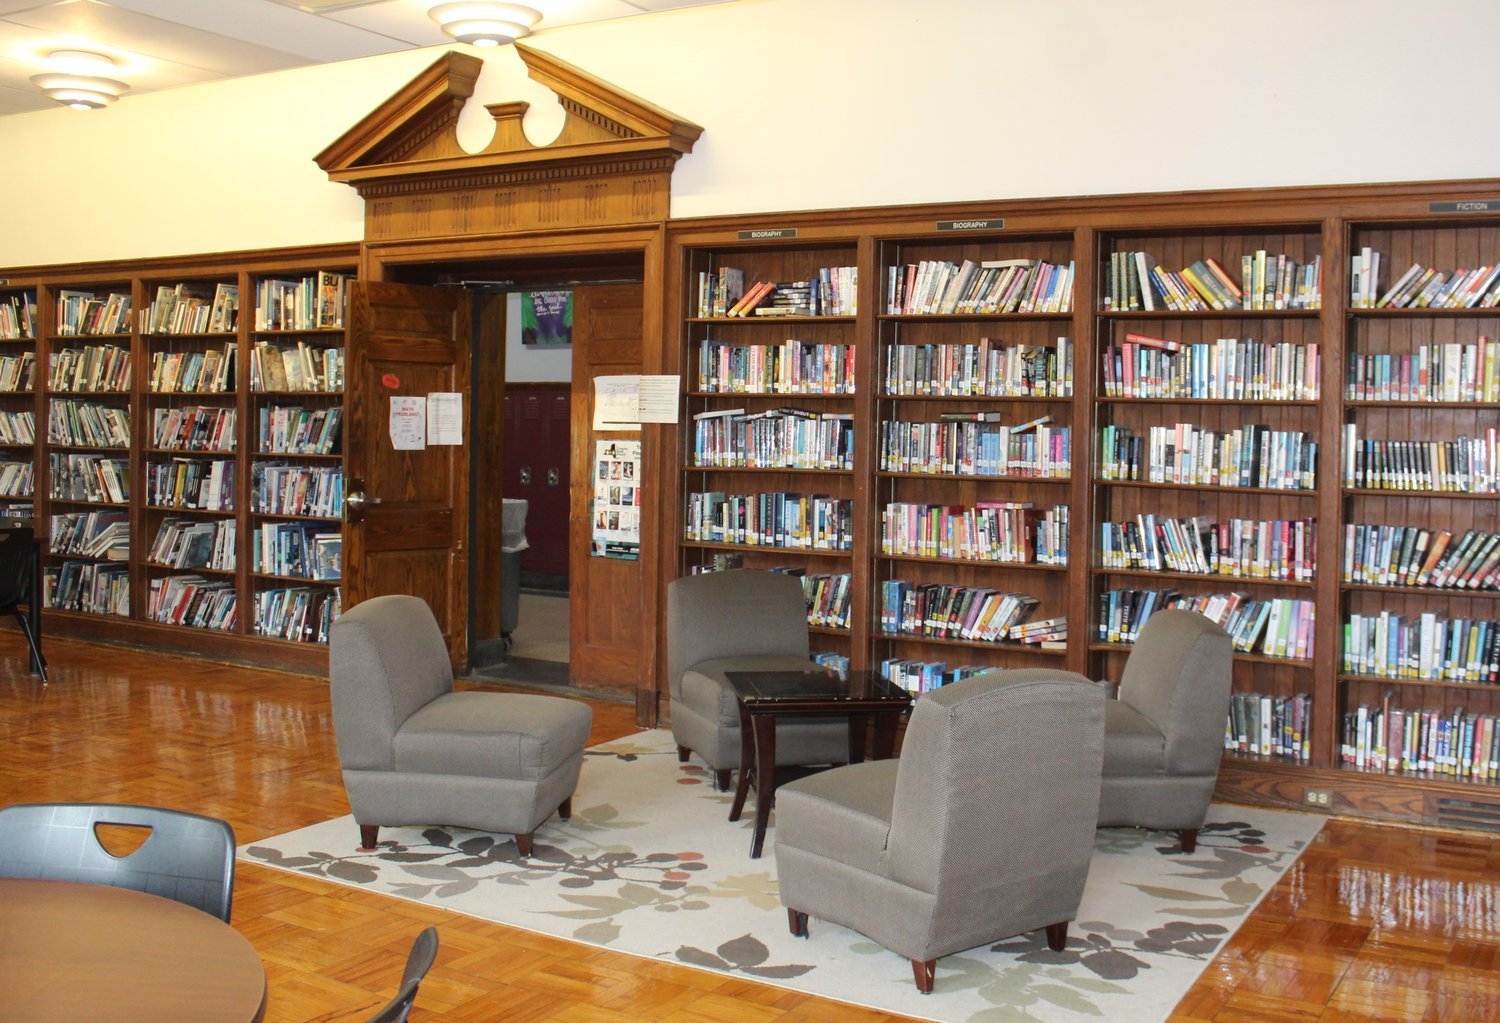 The rich architectural details of the high school library will be incorporated into the
renovations of the area into a multi-media learning center designed to enhance independent and teacher-directed learning, one phase of an ambitious construction improvement initiative at the Eldred Junior-Senior High School.